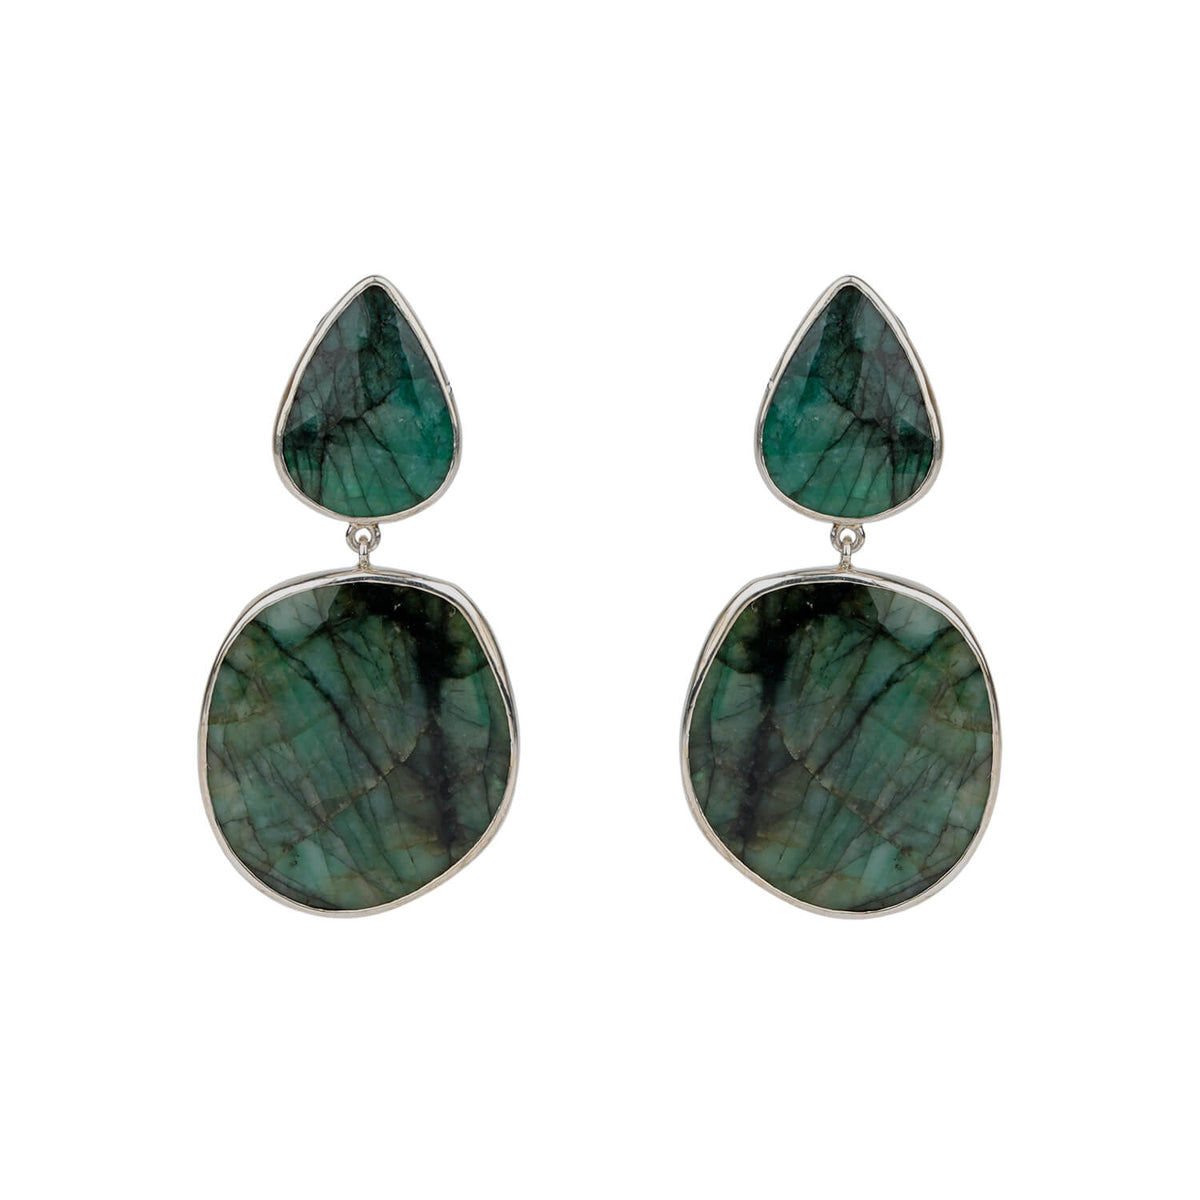 Big Emerald Stones and Silver 925 Earrings